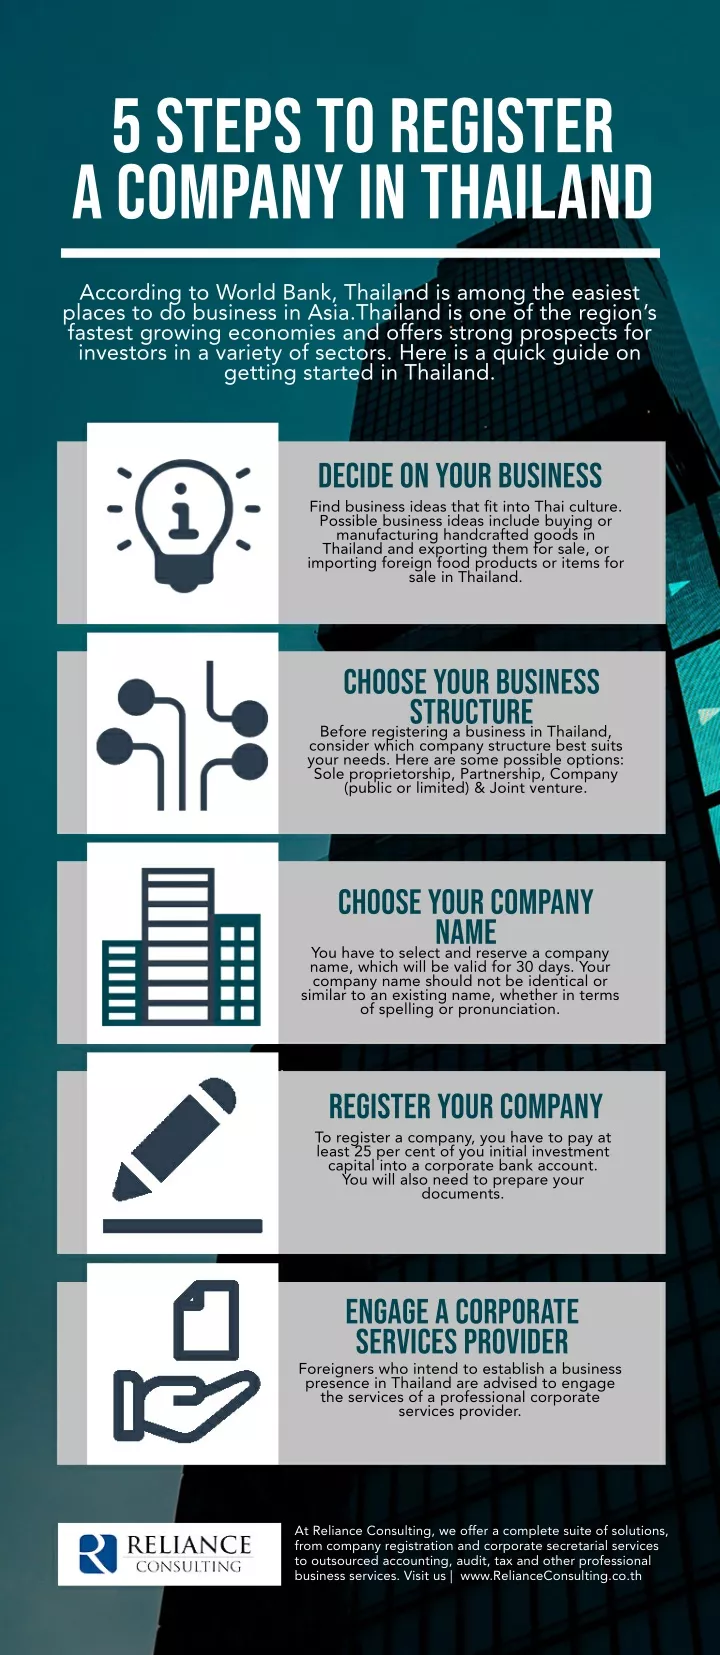 5 steps to register a company in thailand